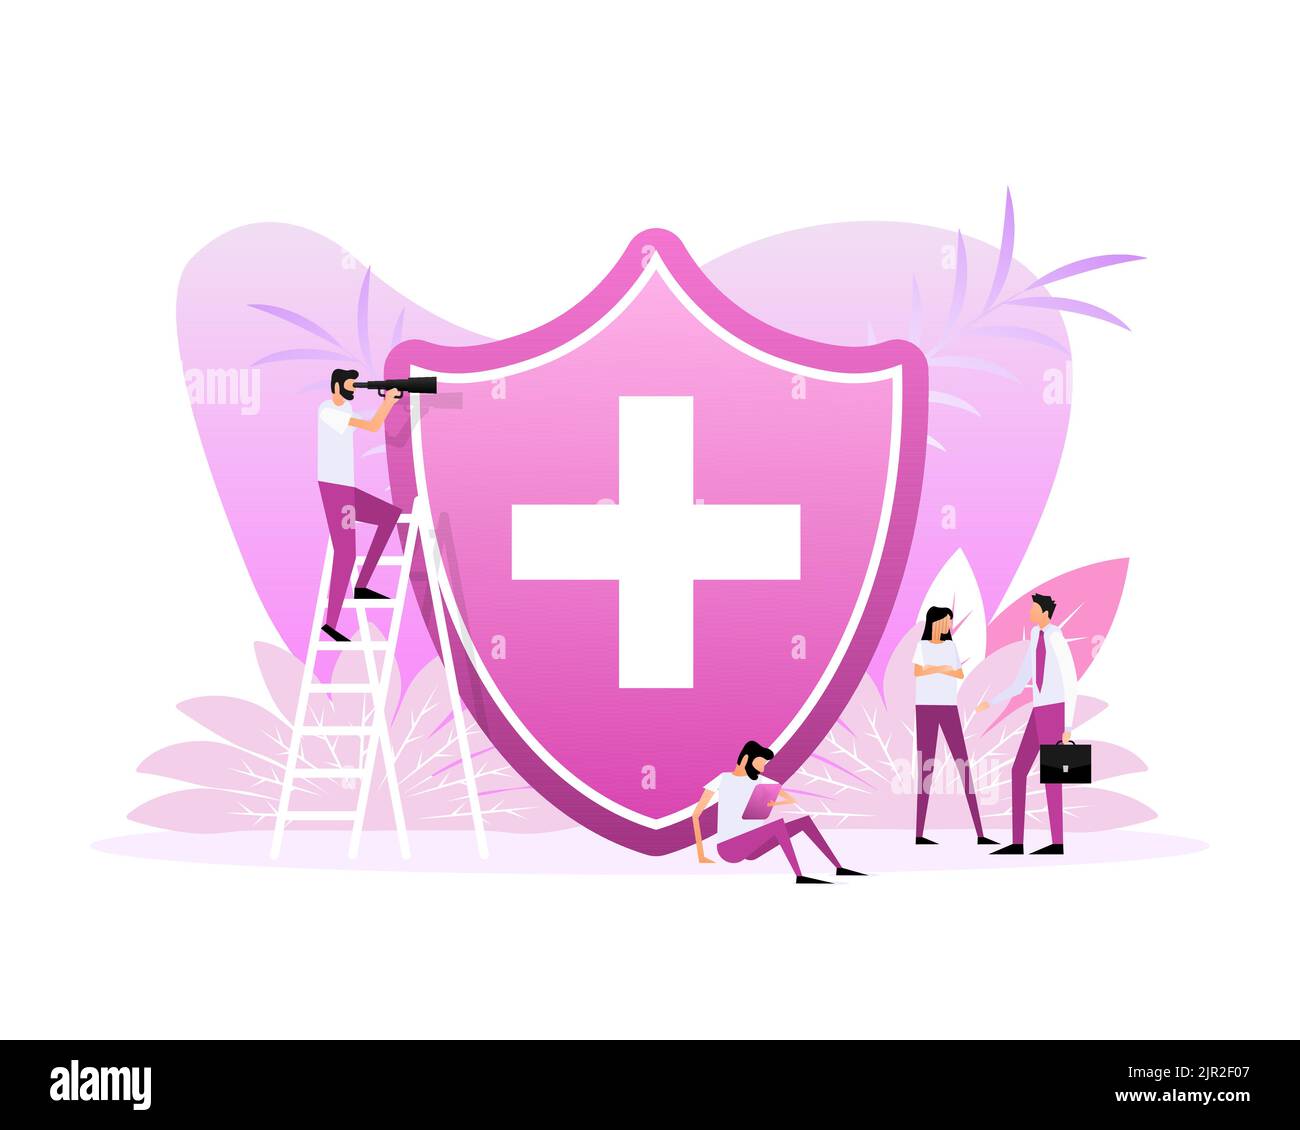 Flat medical insurance people for concept design. Health insurance concept Stock Vector